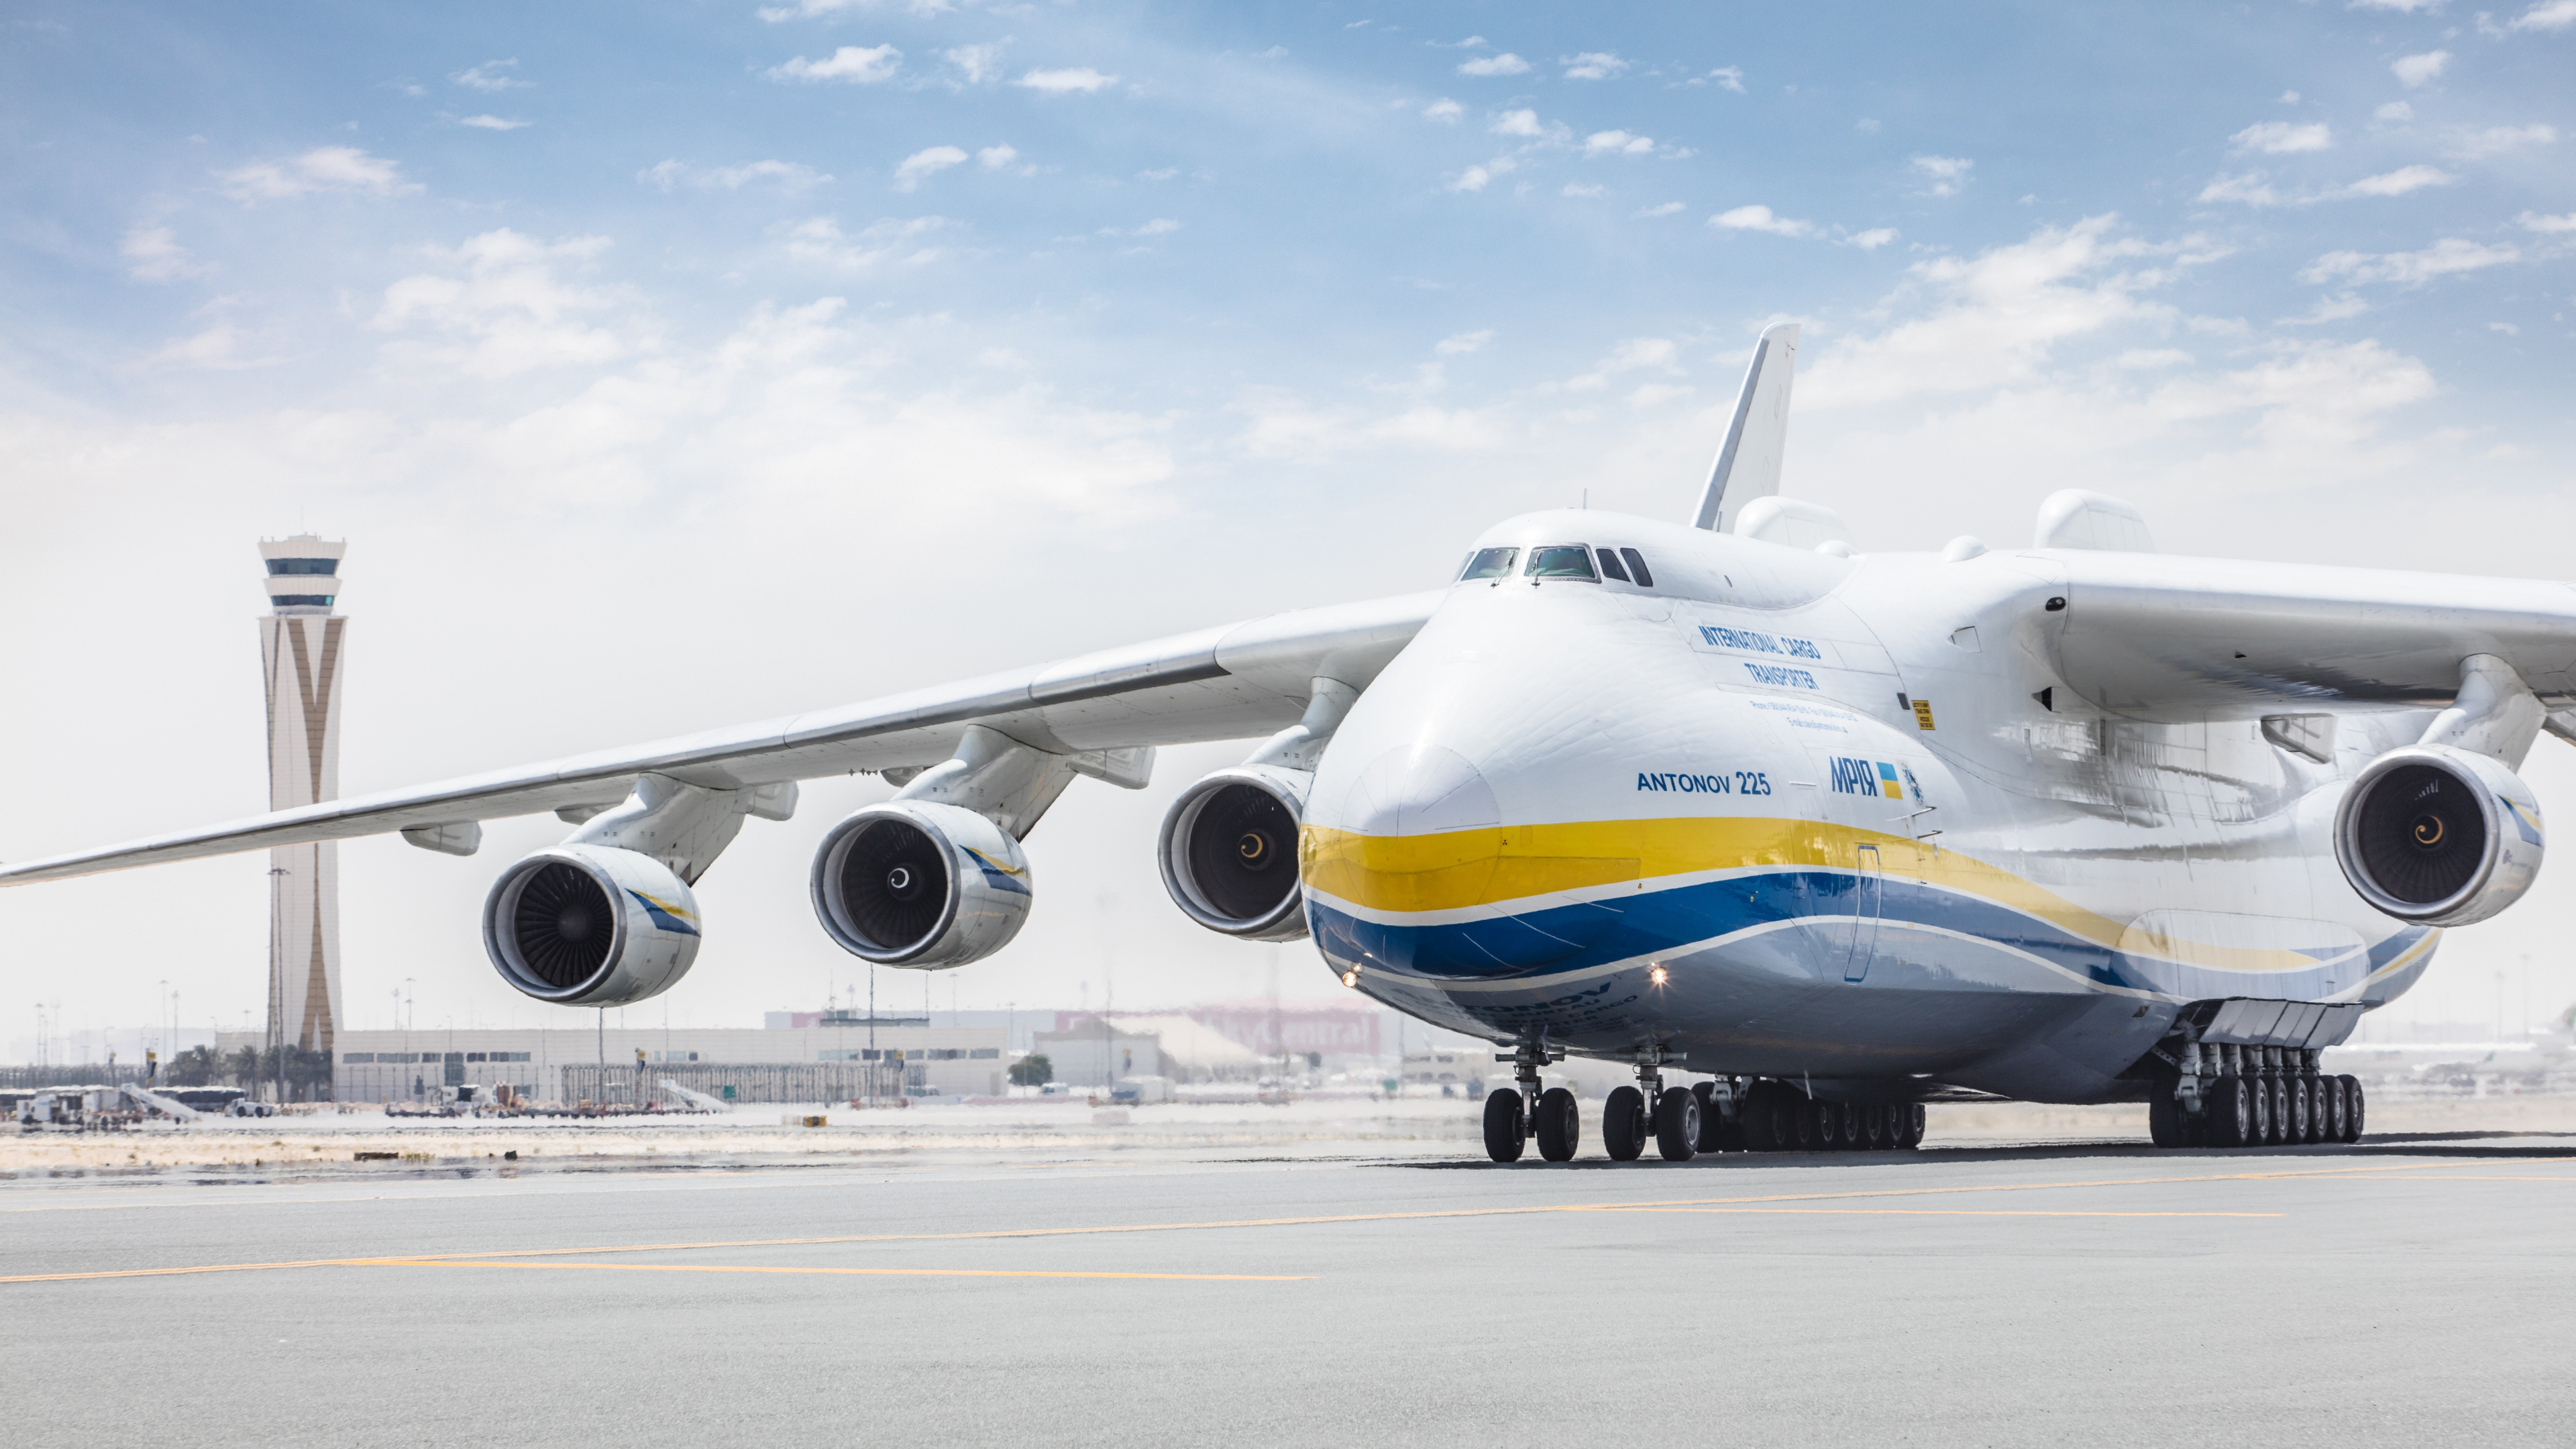 Aircraft, Airplane, Cargo Aircraft, Airliner, Antonov. Wallpaper in 3840x2160 Resolution